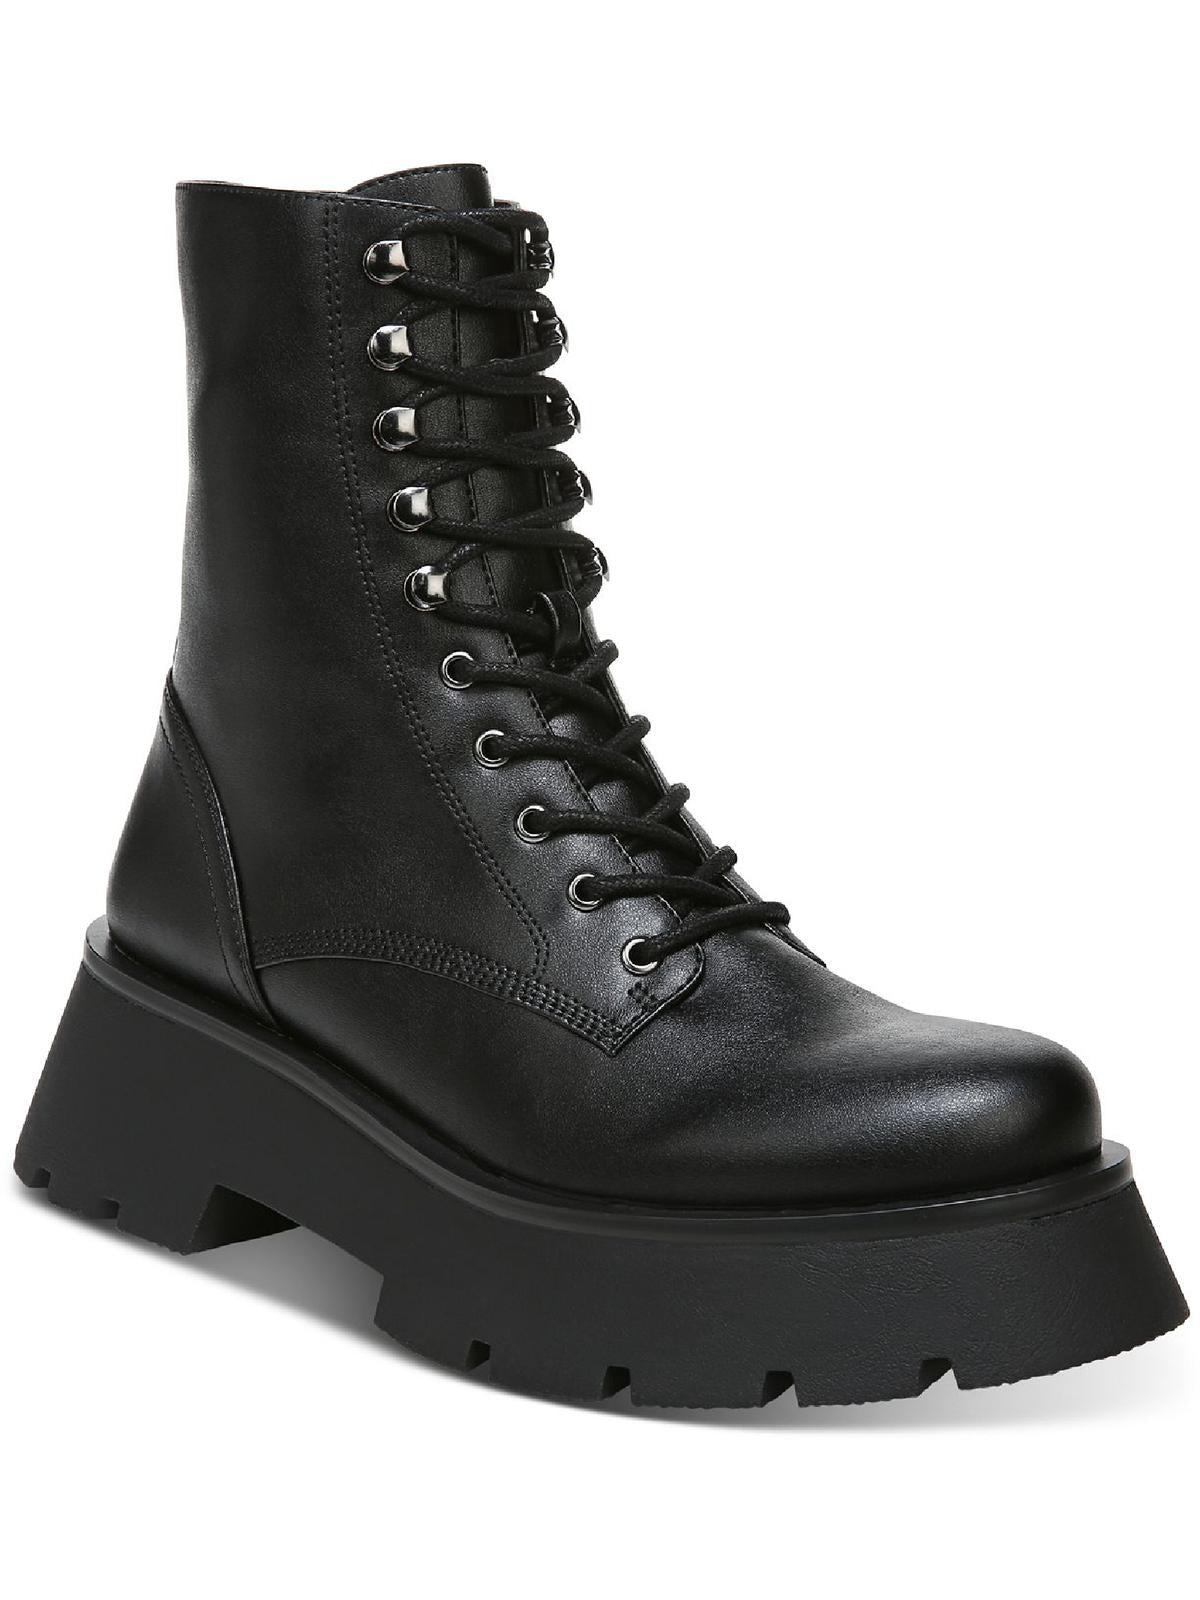 Circus by Sam Edelman Lolita Zipper Combat & Lace-up Boots in Black | Lyst